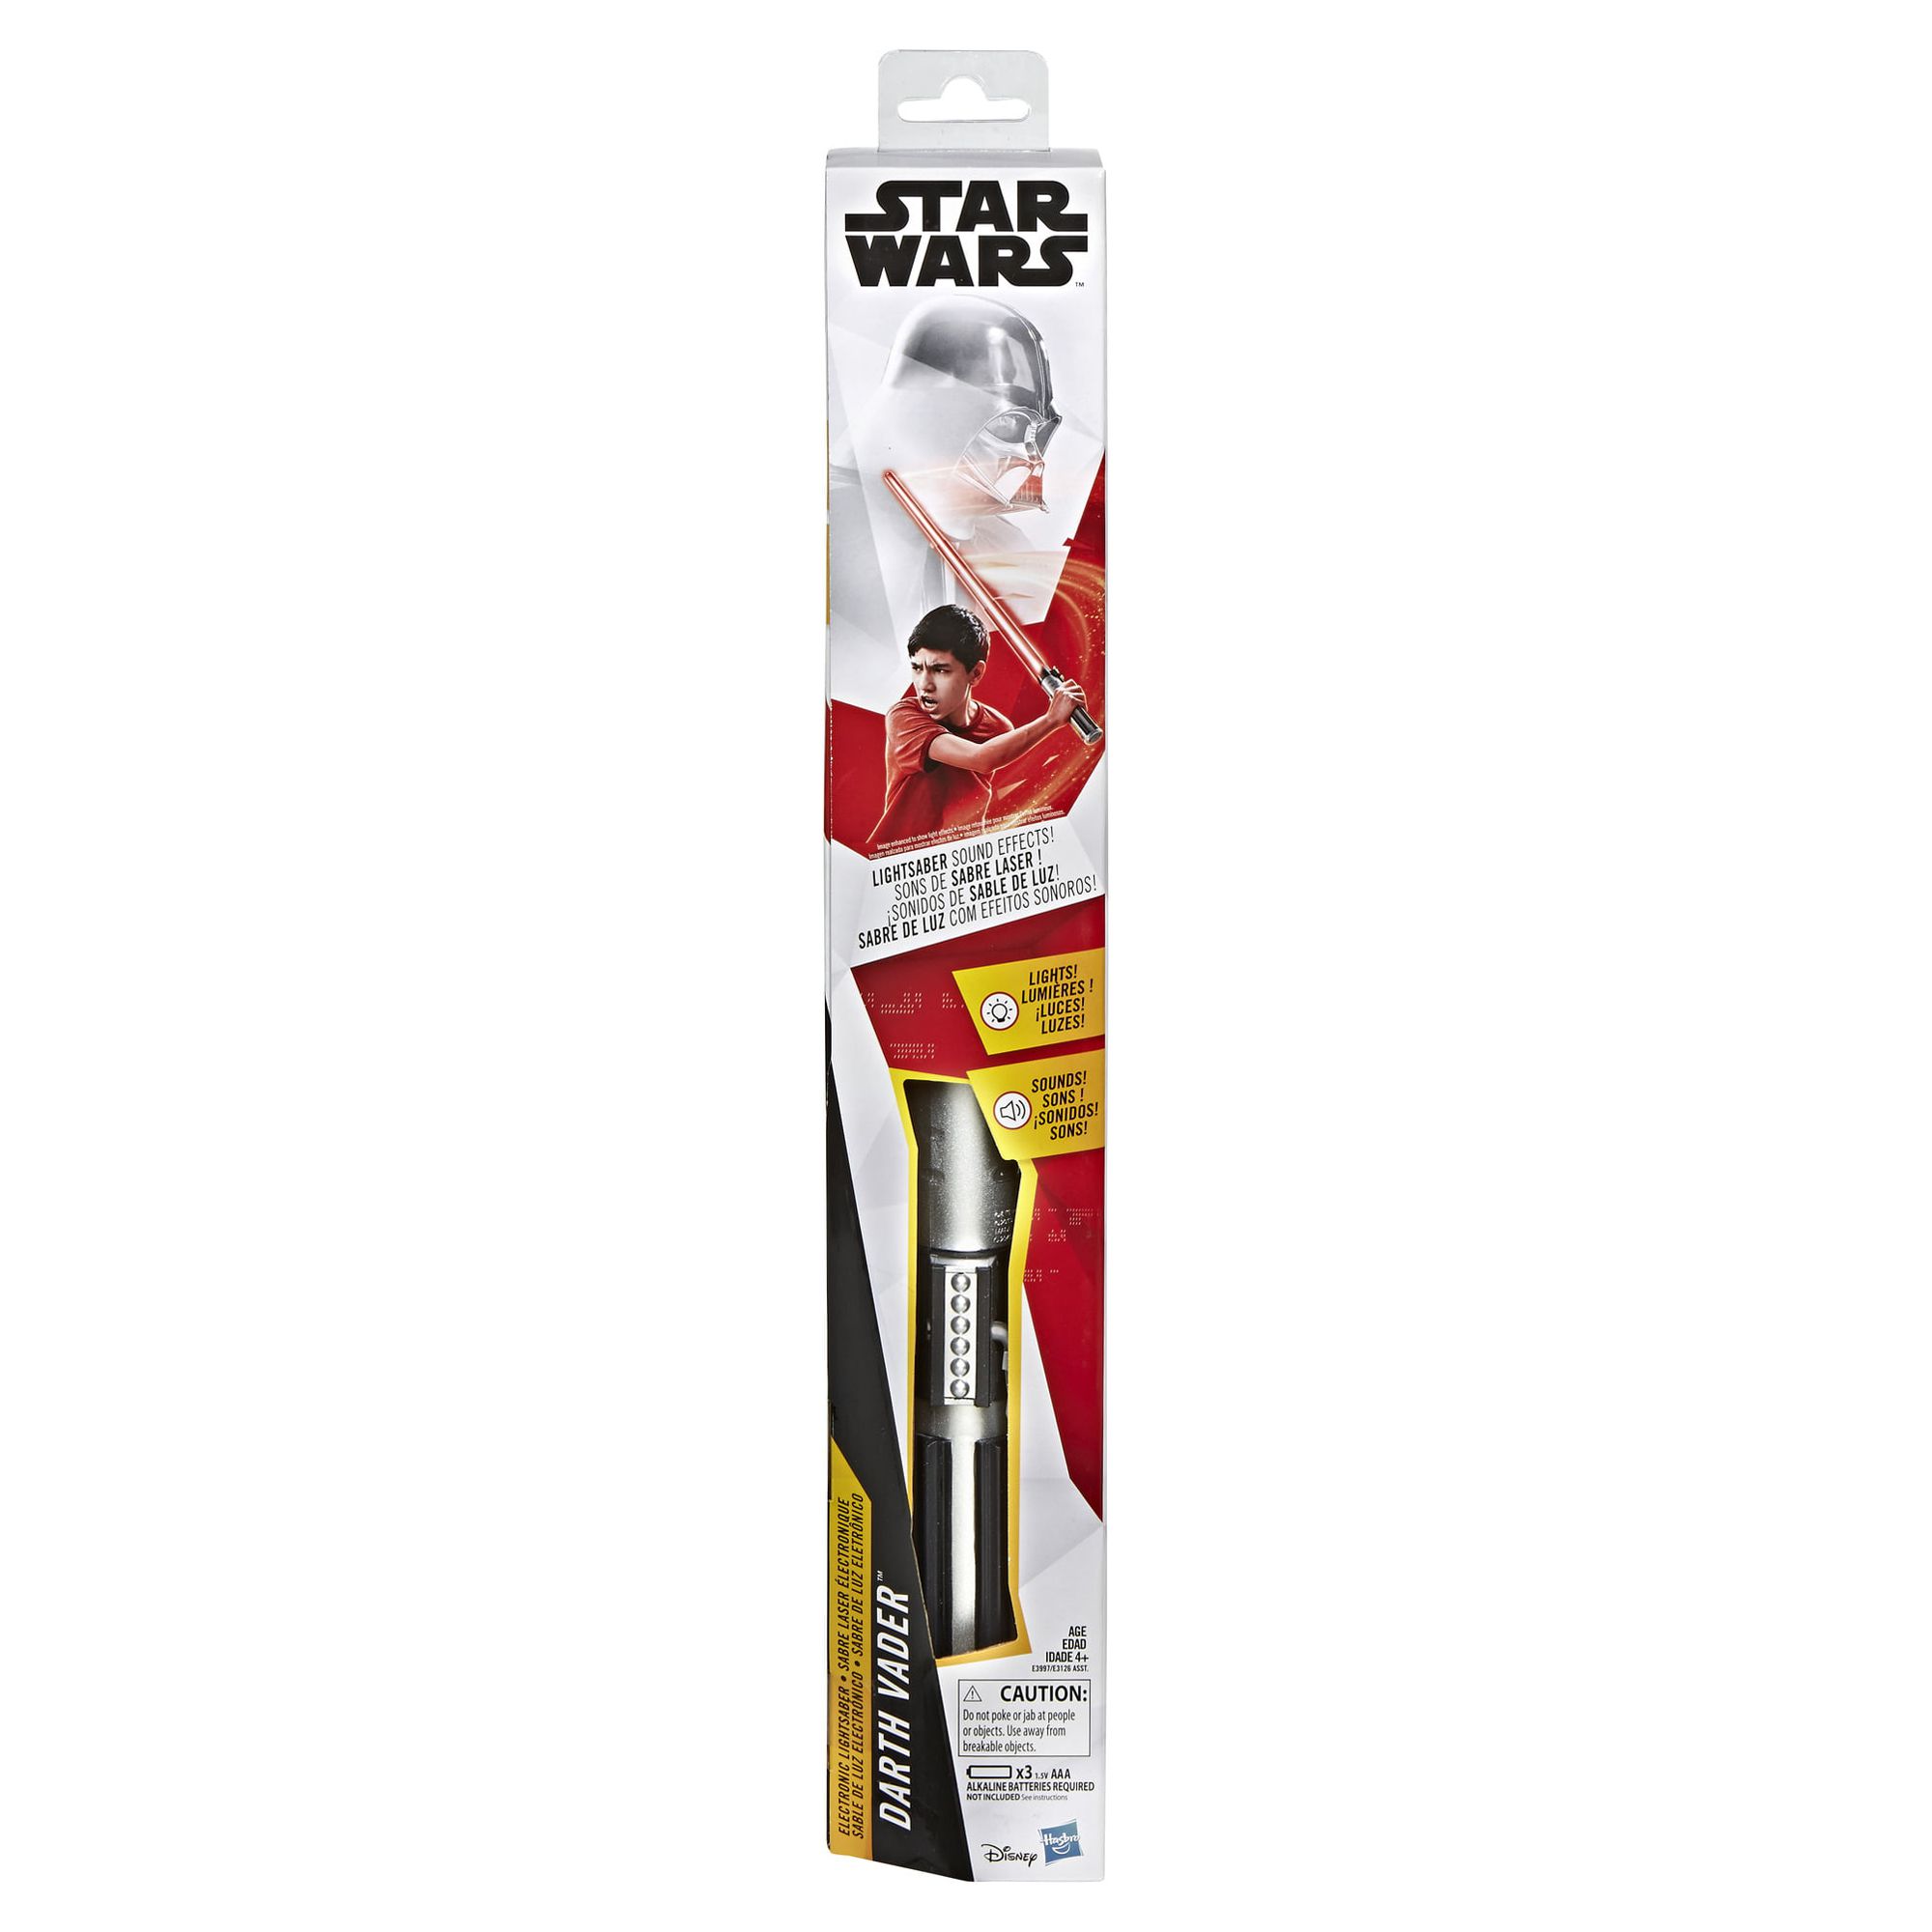 Star Wars Darth Vader Electronic Red Lightsaber Toy Ages 6 and Up Action Figure Accessory - image 2 of 13